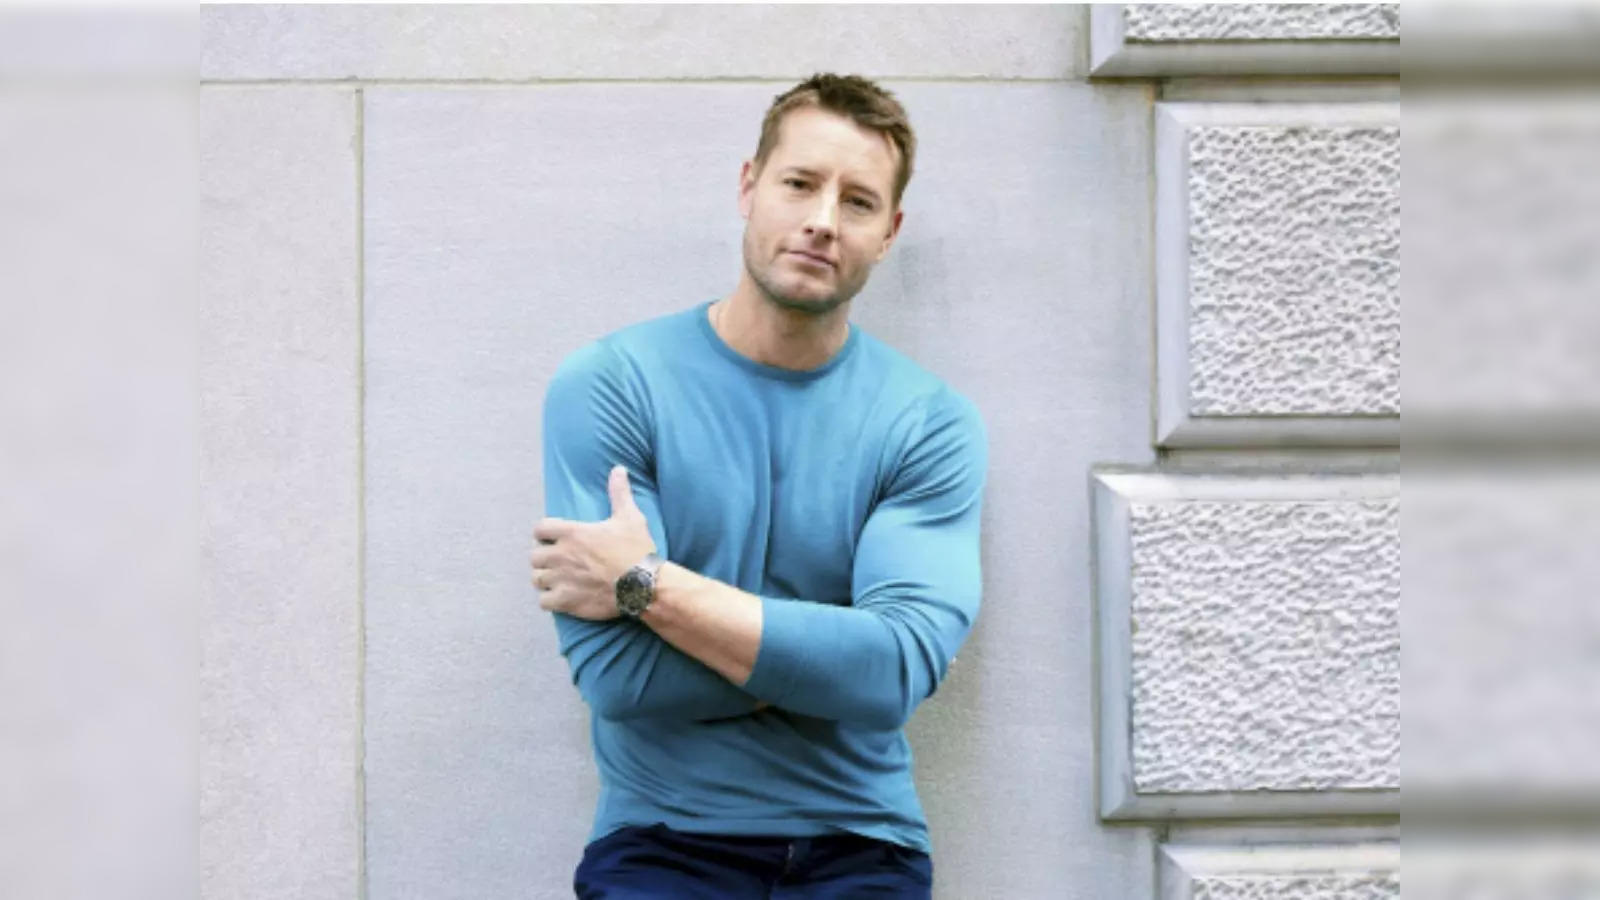 Justin Hartley News: Justin Hartley, who played Kevin Pearson on